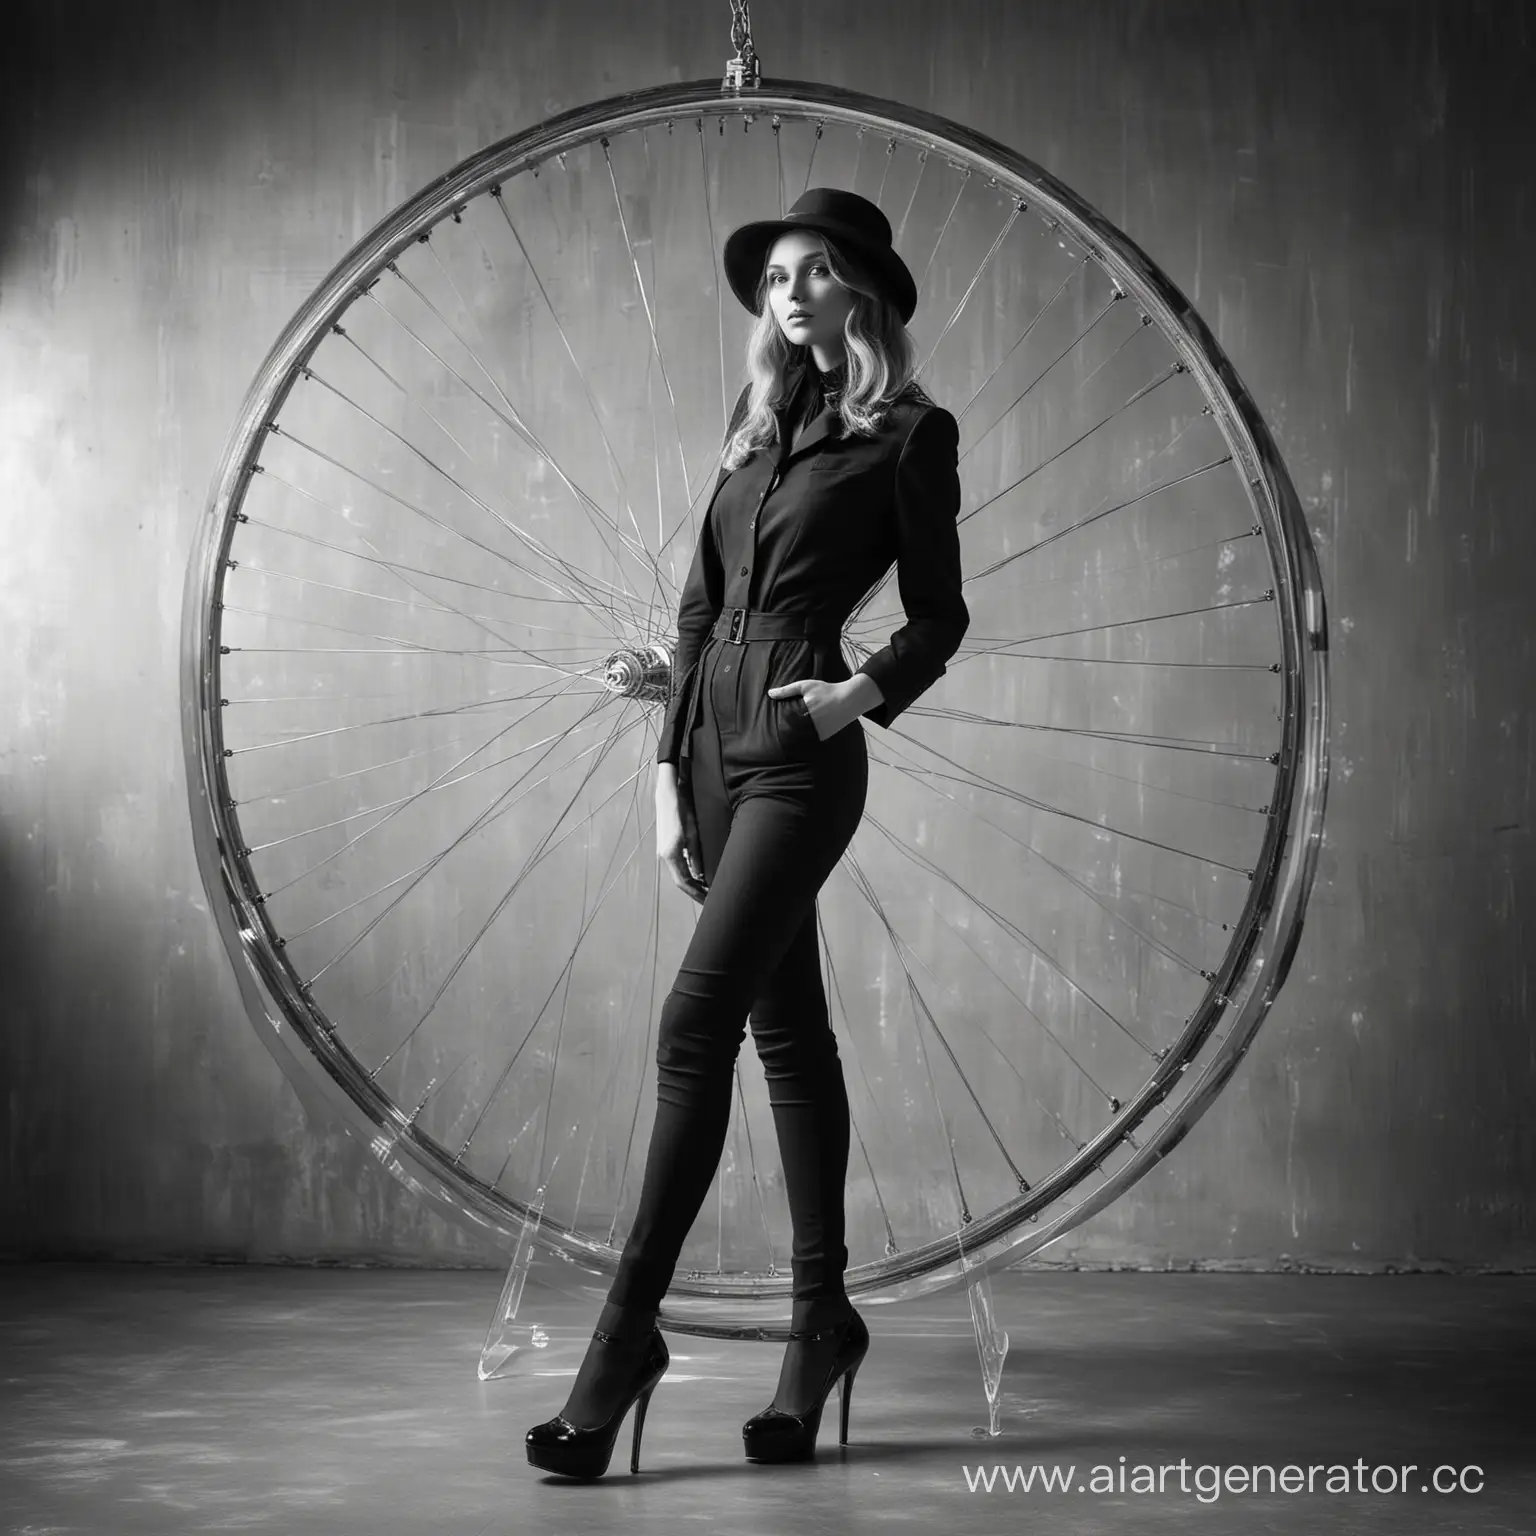 Vintage-Black-and-White-Portrait-European-Fashion-Model-with-Bicycle-Wheel-Hat